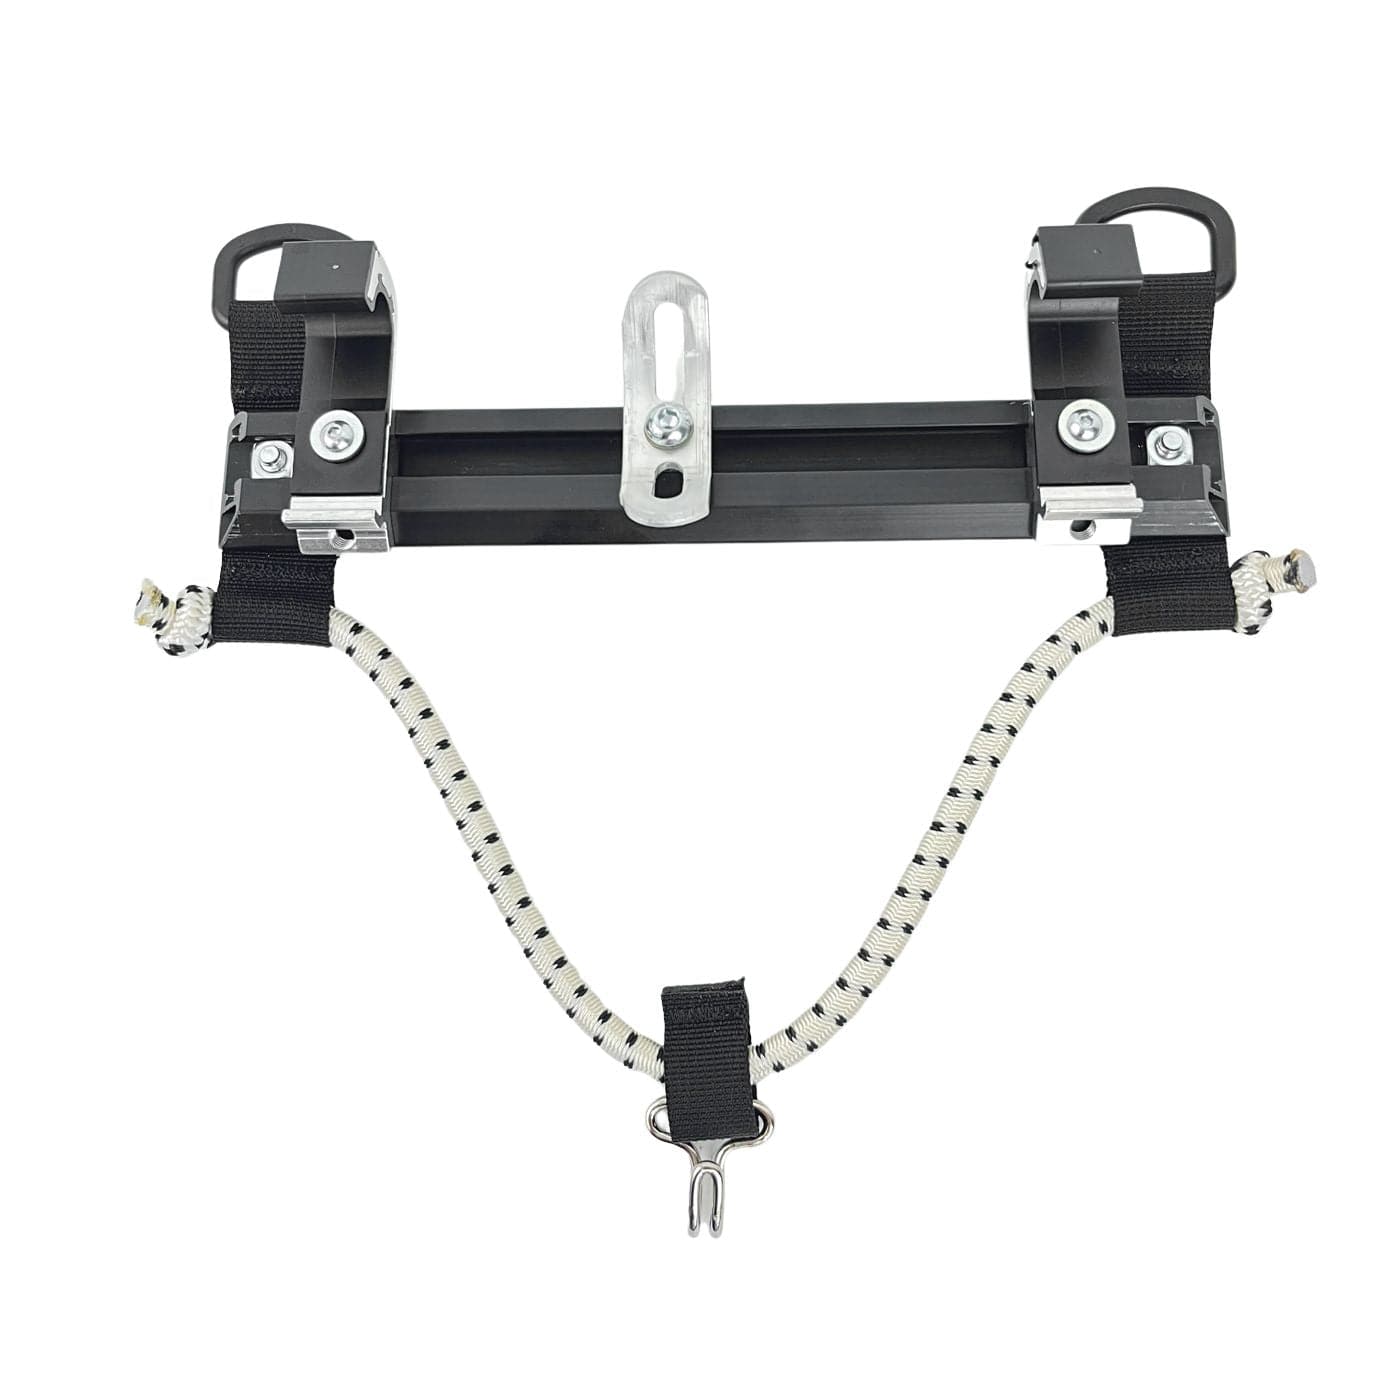 Hook Kit Manual Locking System - Complete with mounting hardware